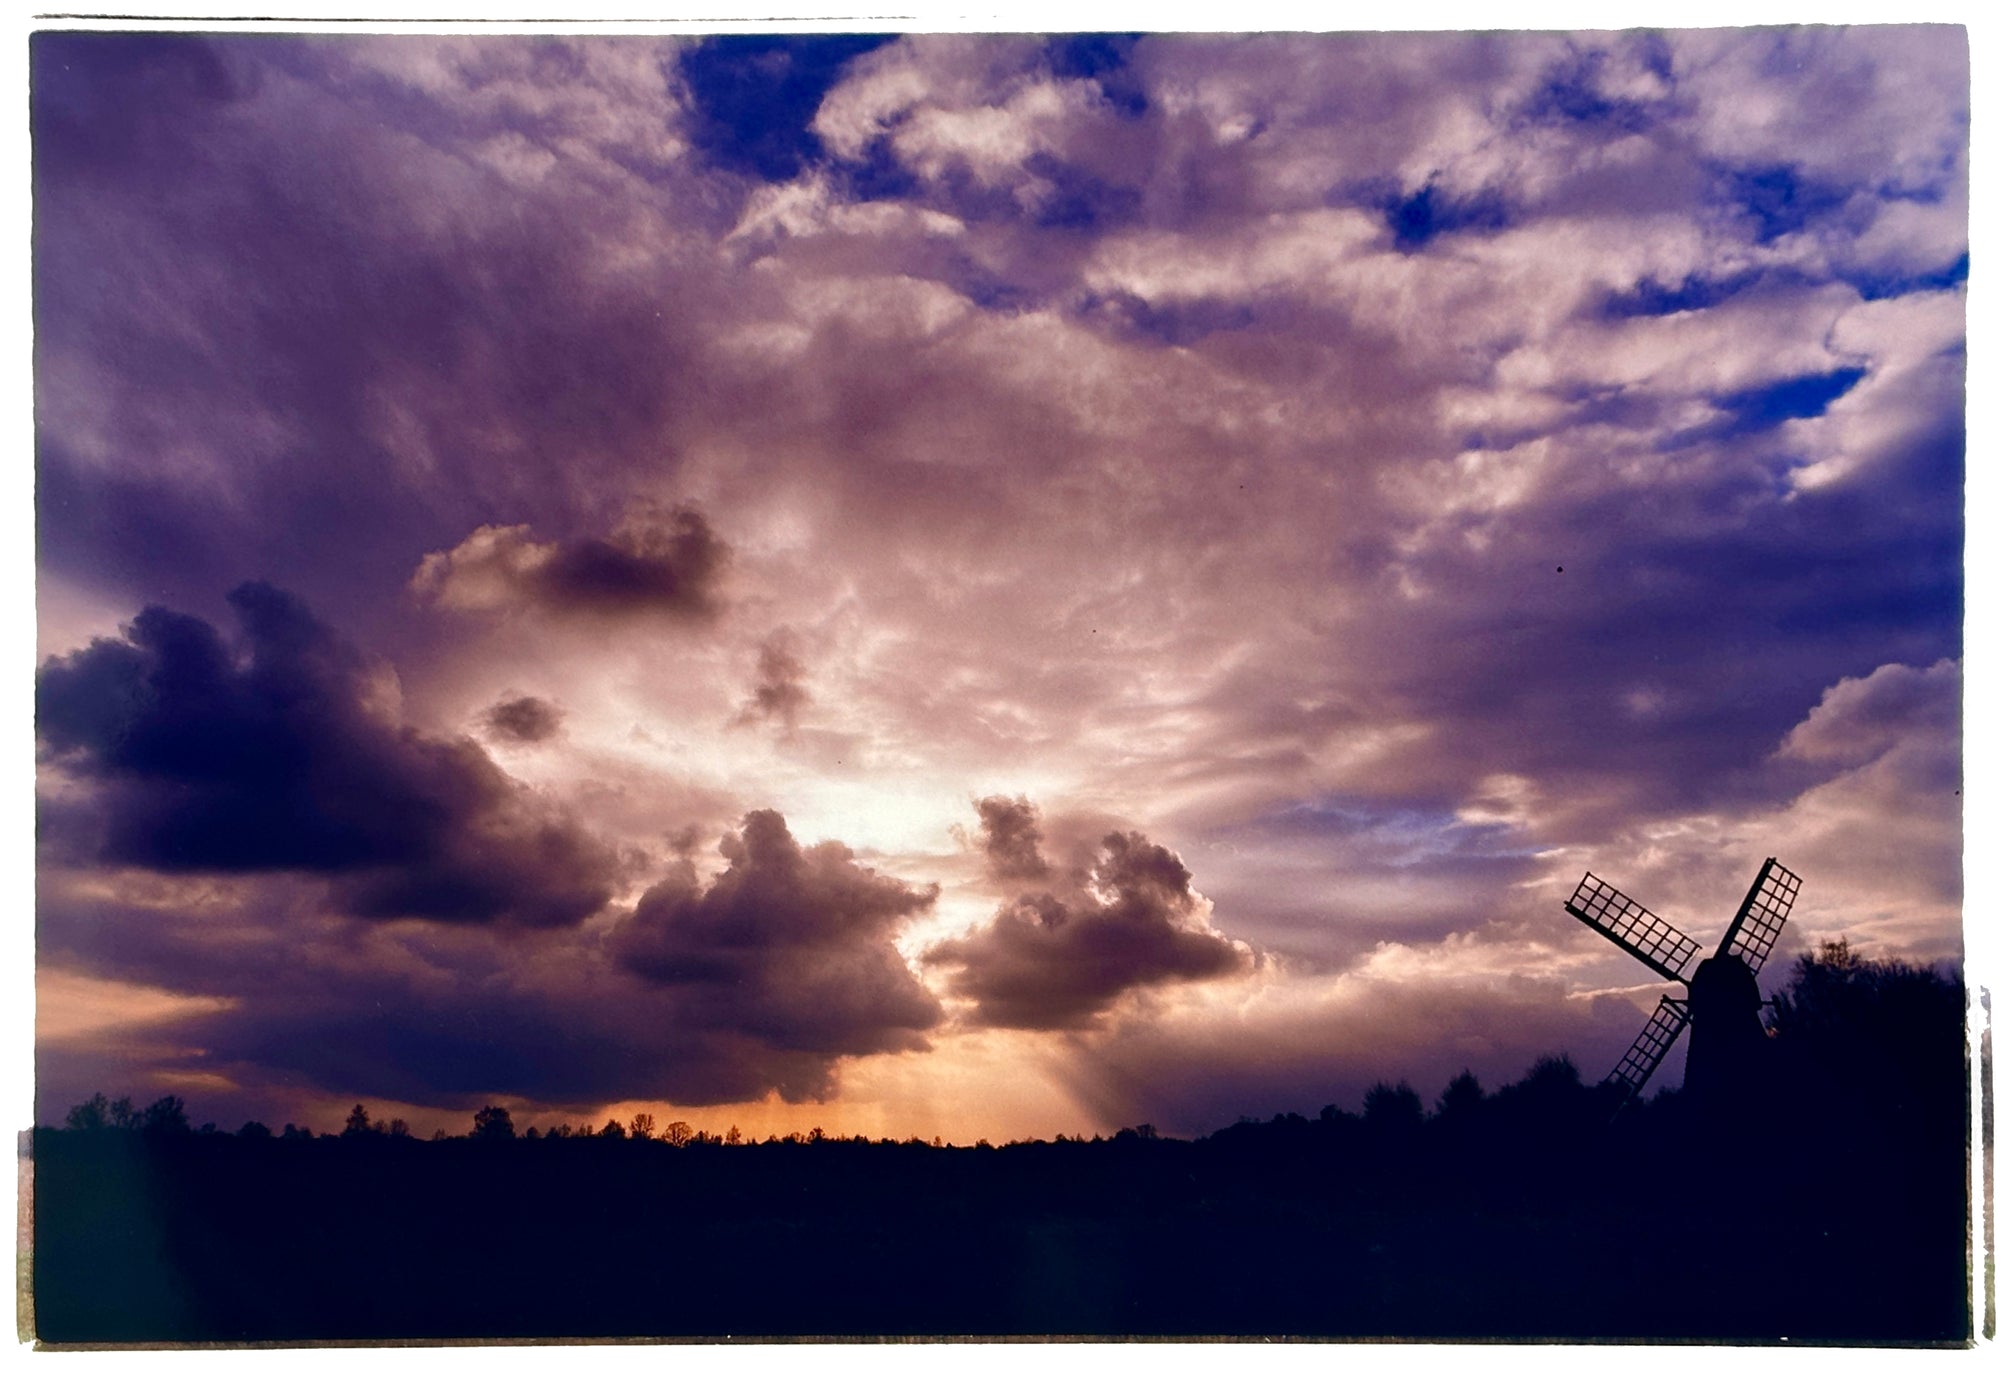 Photograph by Richard Heeps. A silhouette of a tree lined fen flat land with a windpump sitting on the right hand side. The sky is cloudy and bathed in golden dusk light.